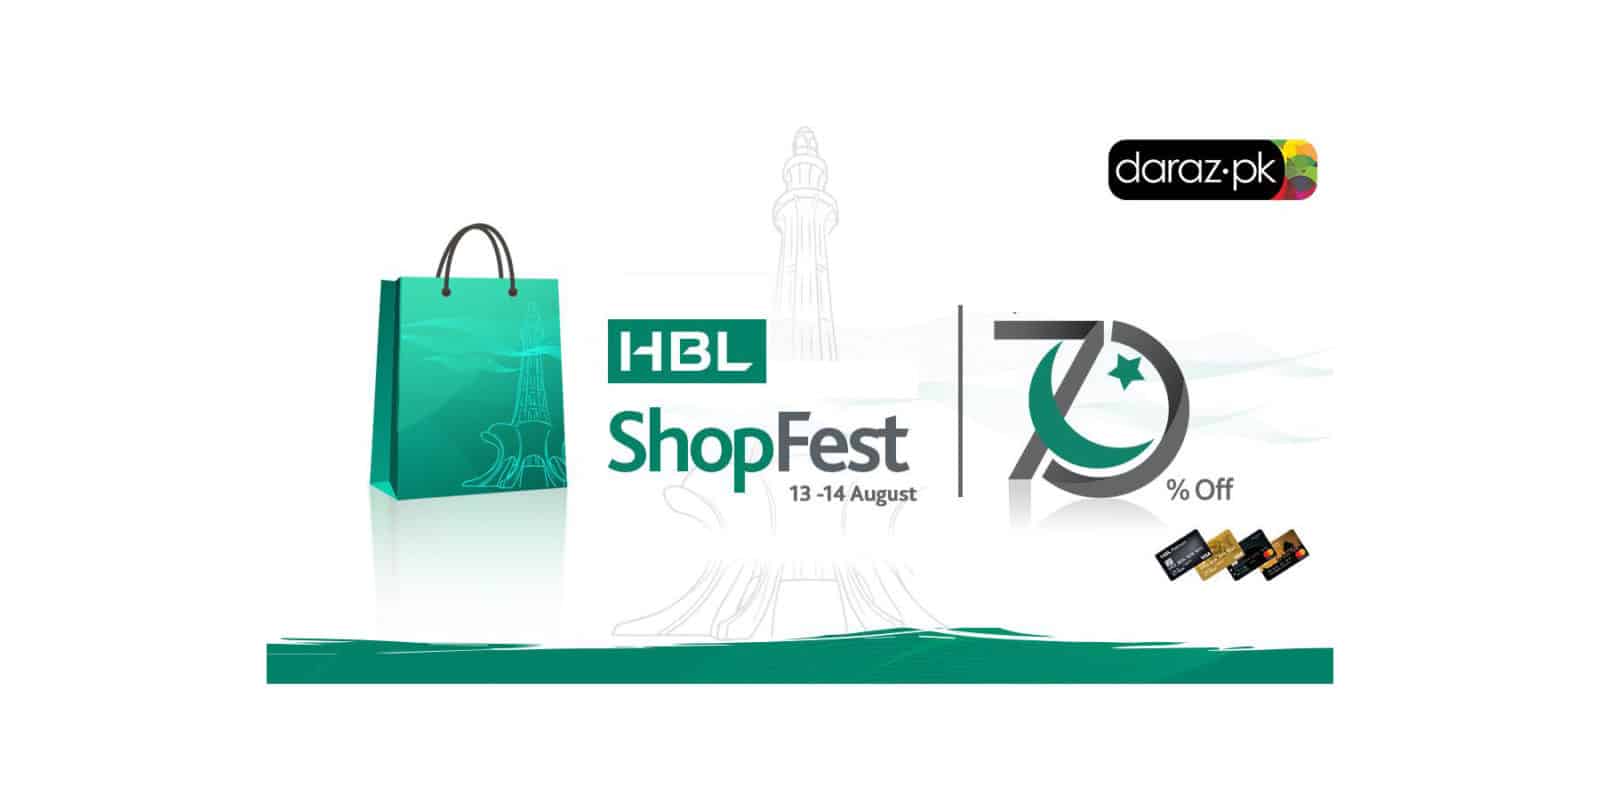 HBL and Daraz.pk Bring upto 70% Independence Day Discounts [Deals Unlocked]